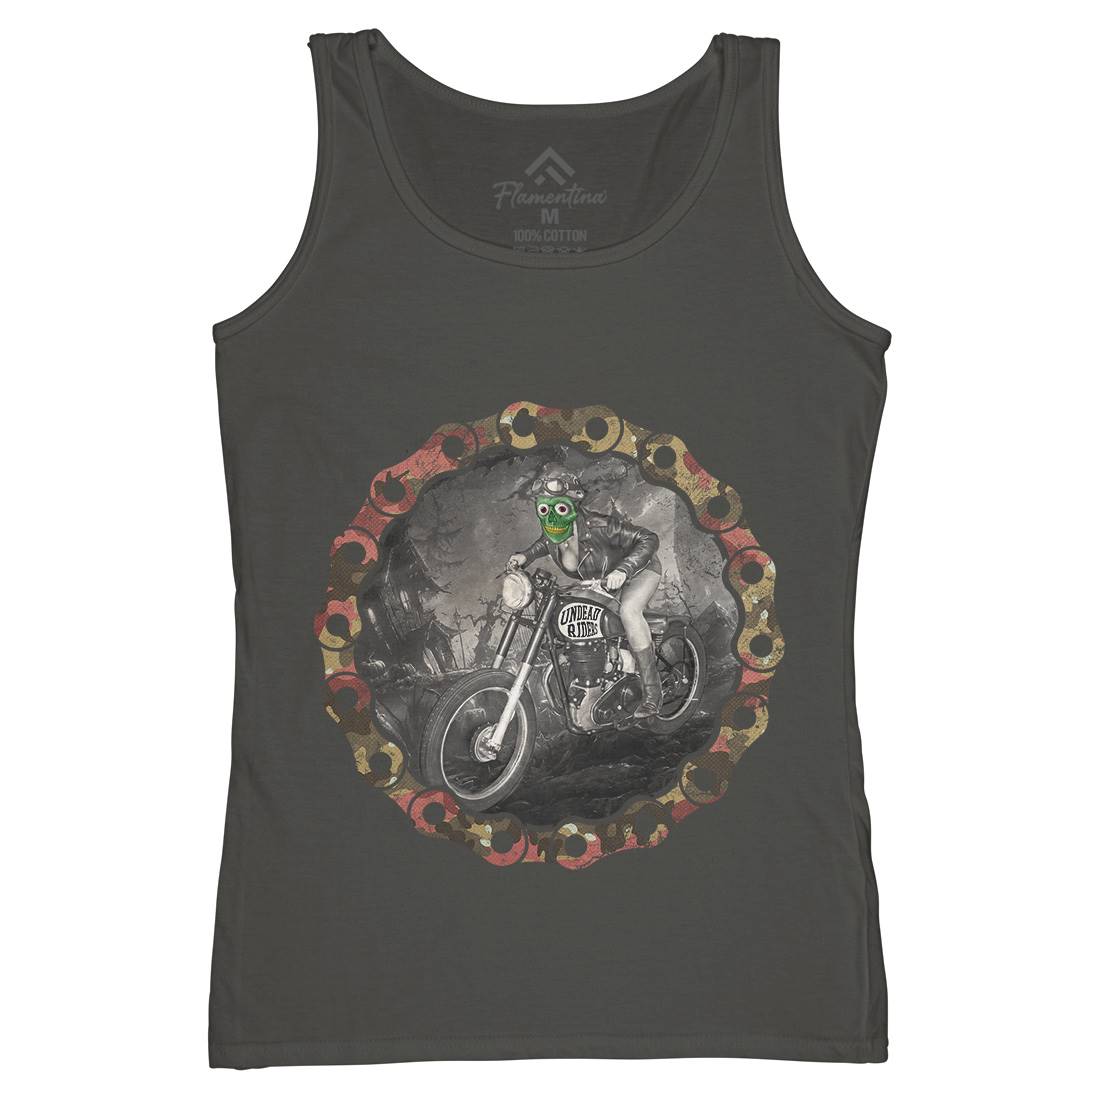 Undead Riders Womens Organic Tank Top Vest Motorcycles A937